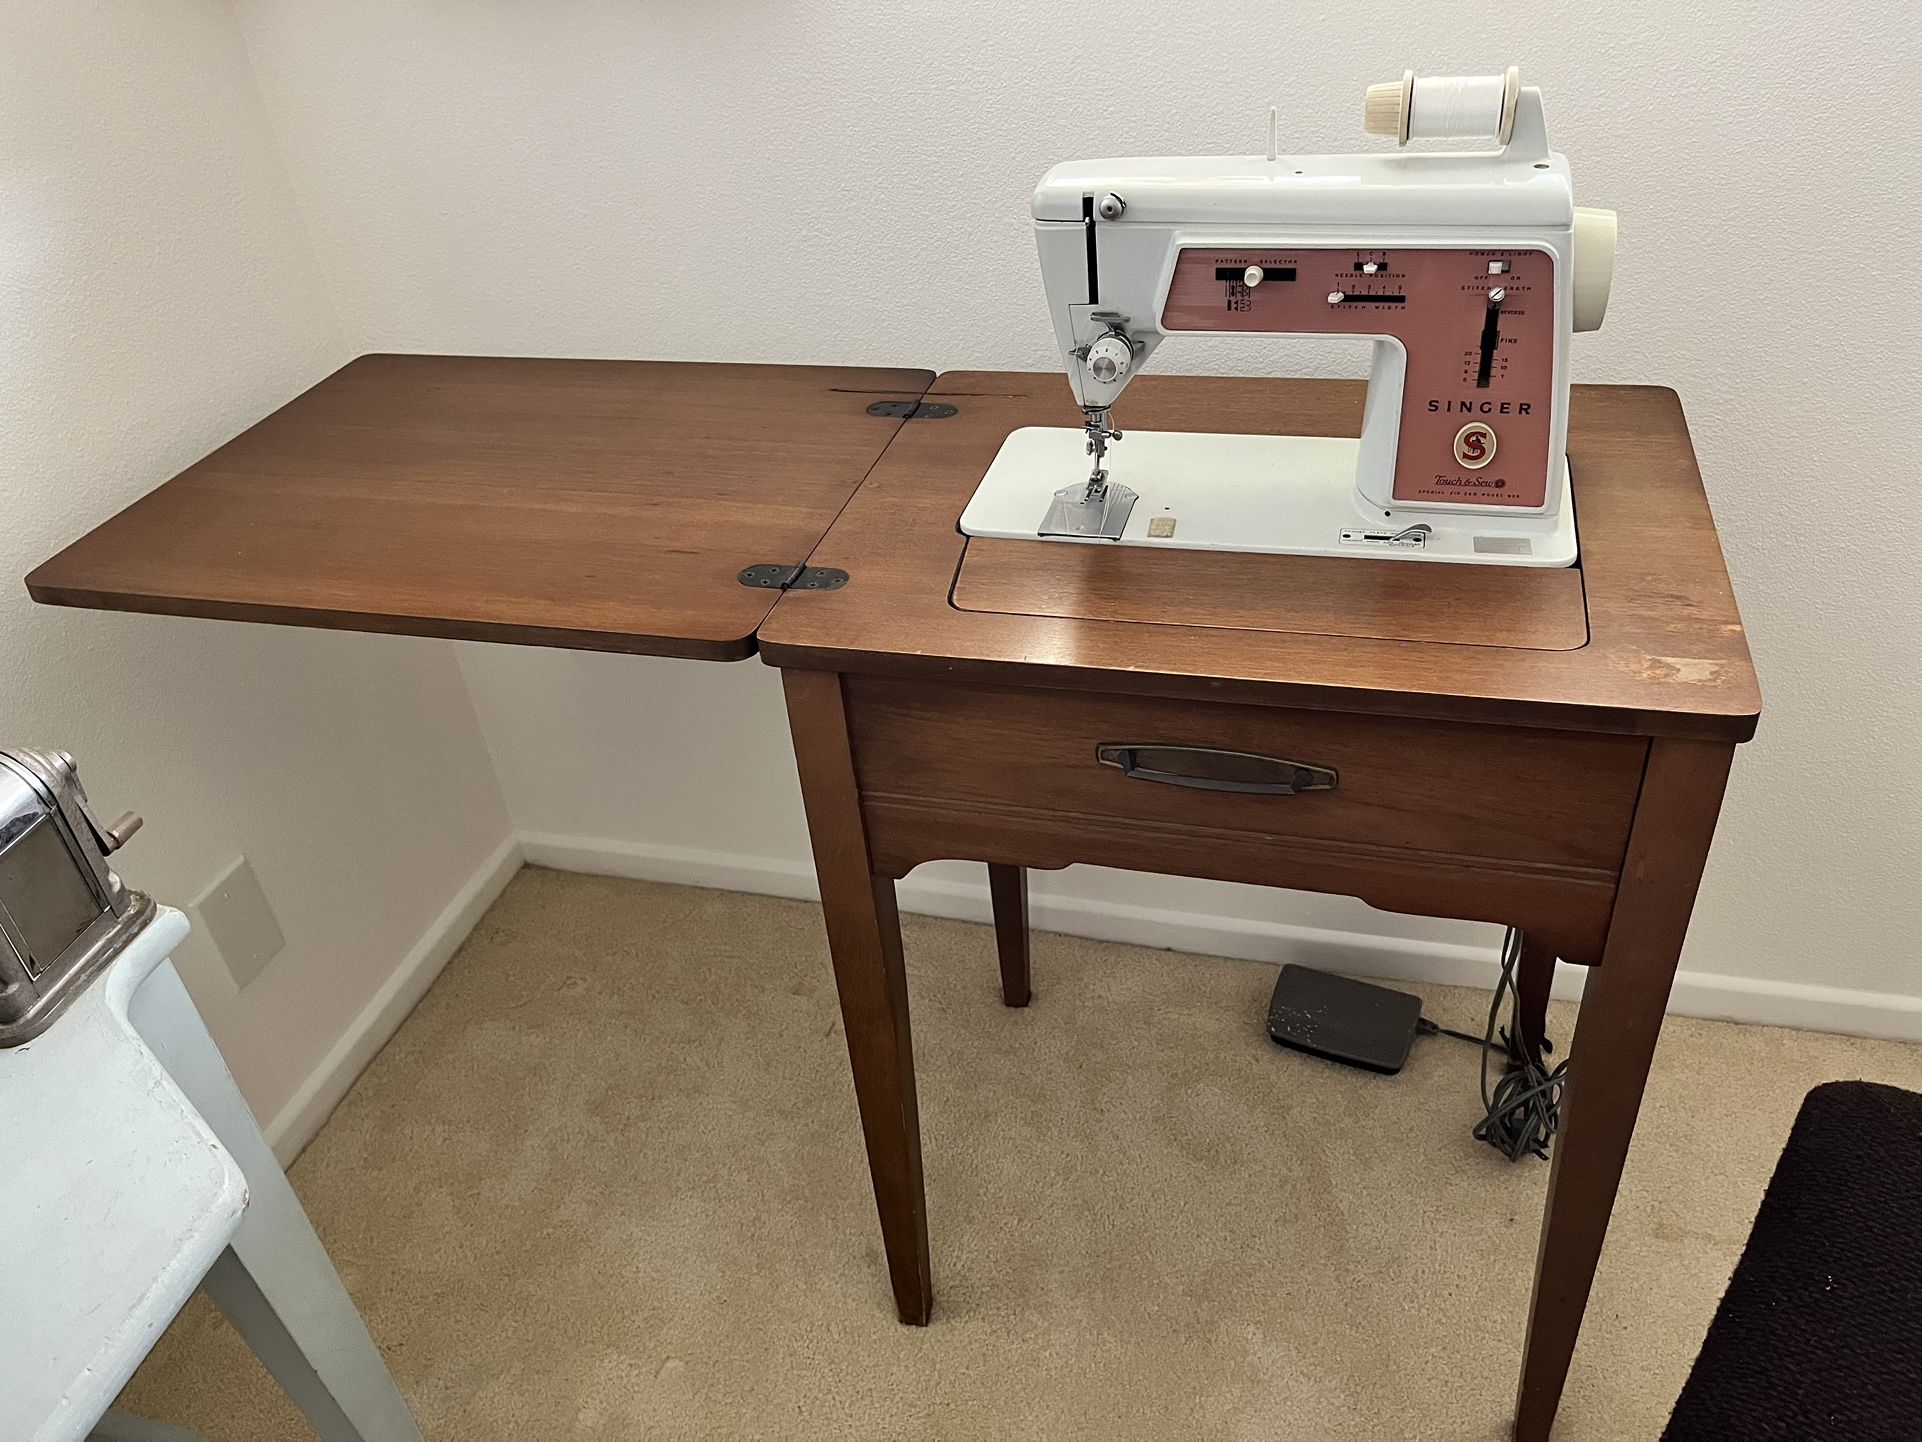 1960’s Singer Sewing Machine And Mid Century Sewing Chair